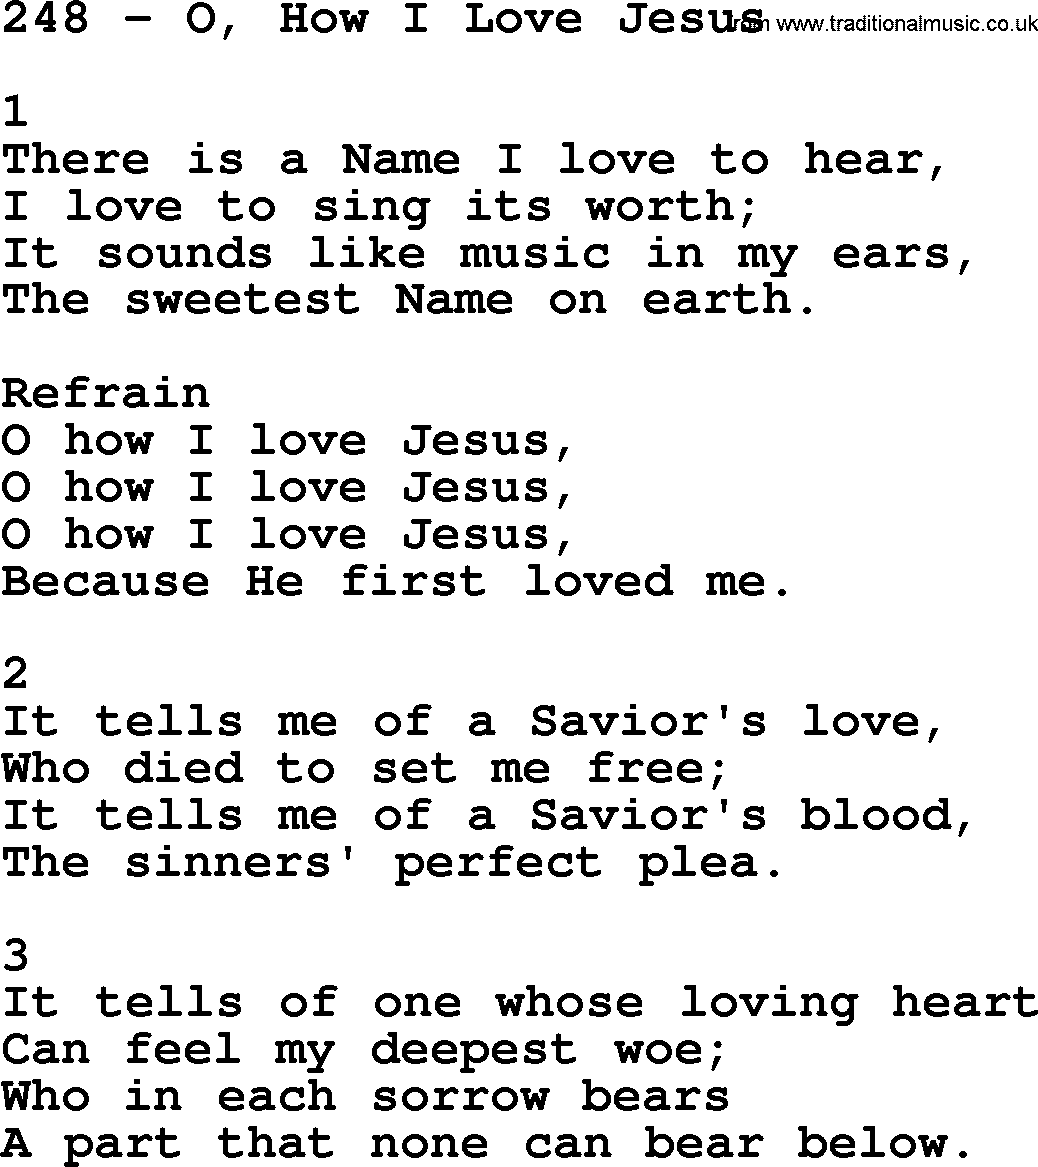 Complete Adventis Hymnal, title: 248-O, How I Love Jesus, with lyrics, midi, mp3, powerpoints(PPT) and PDF,